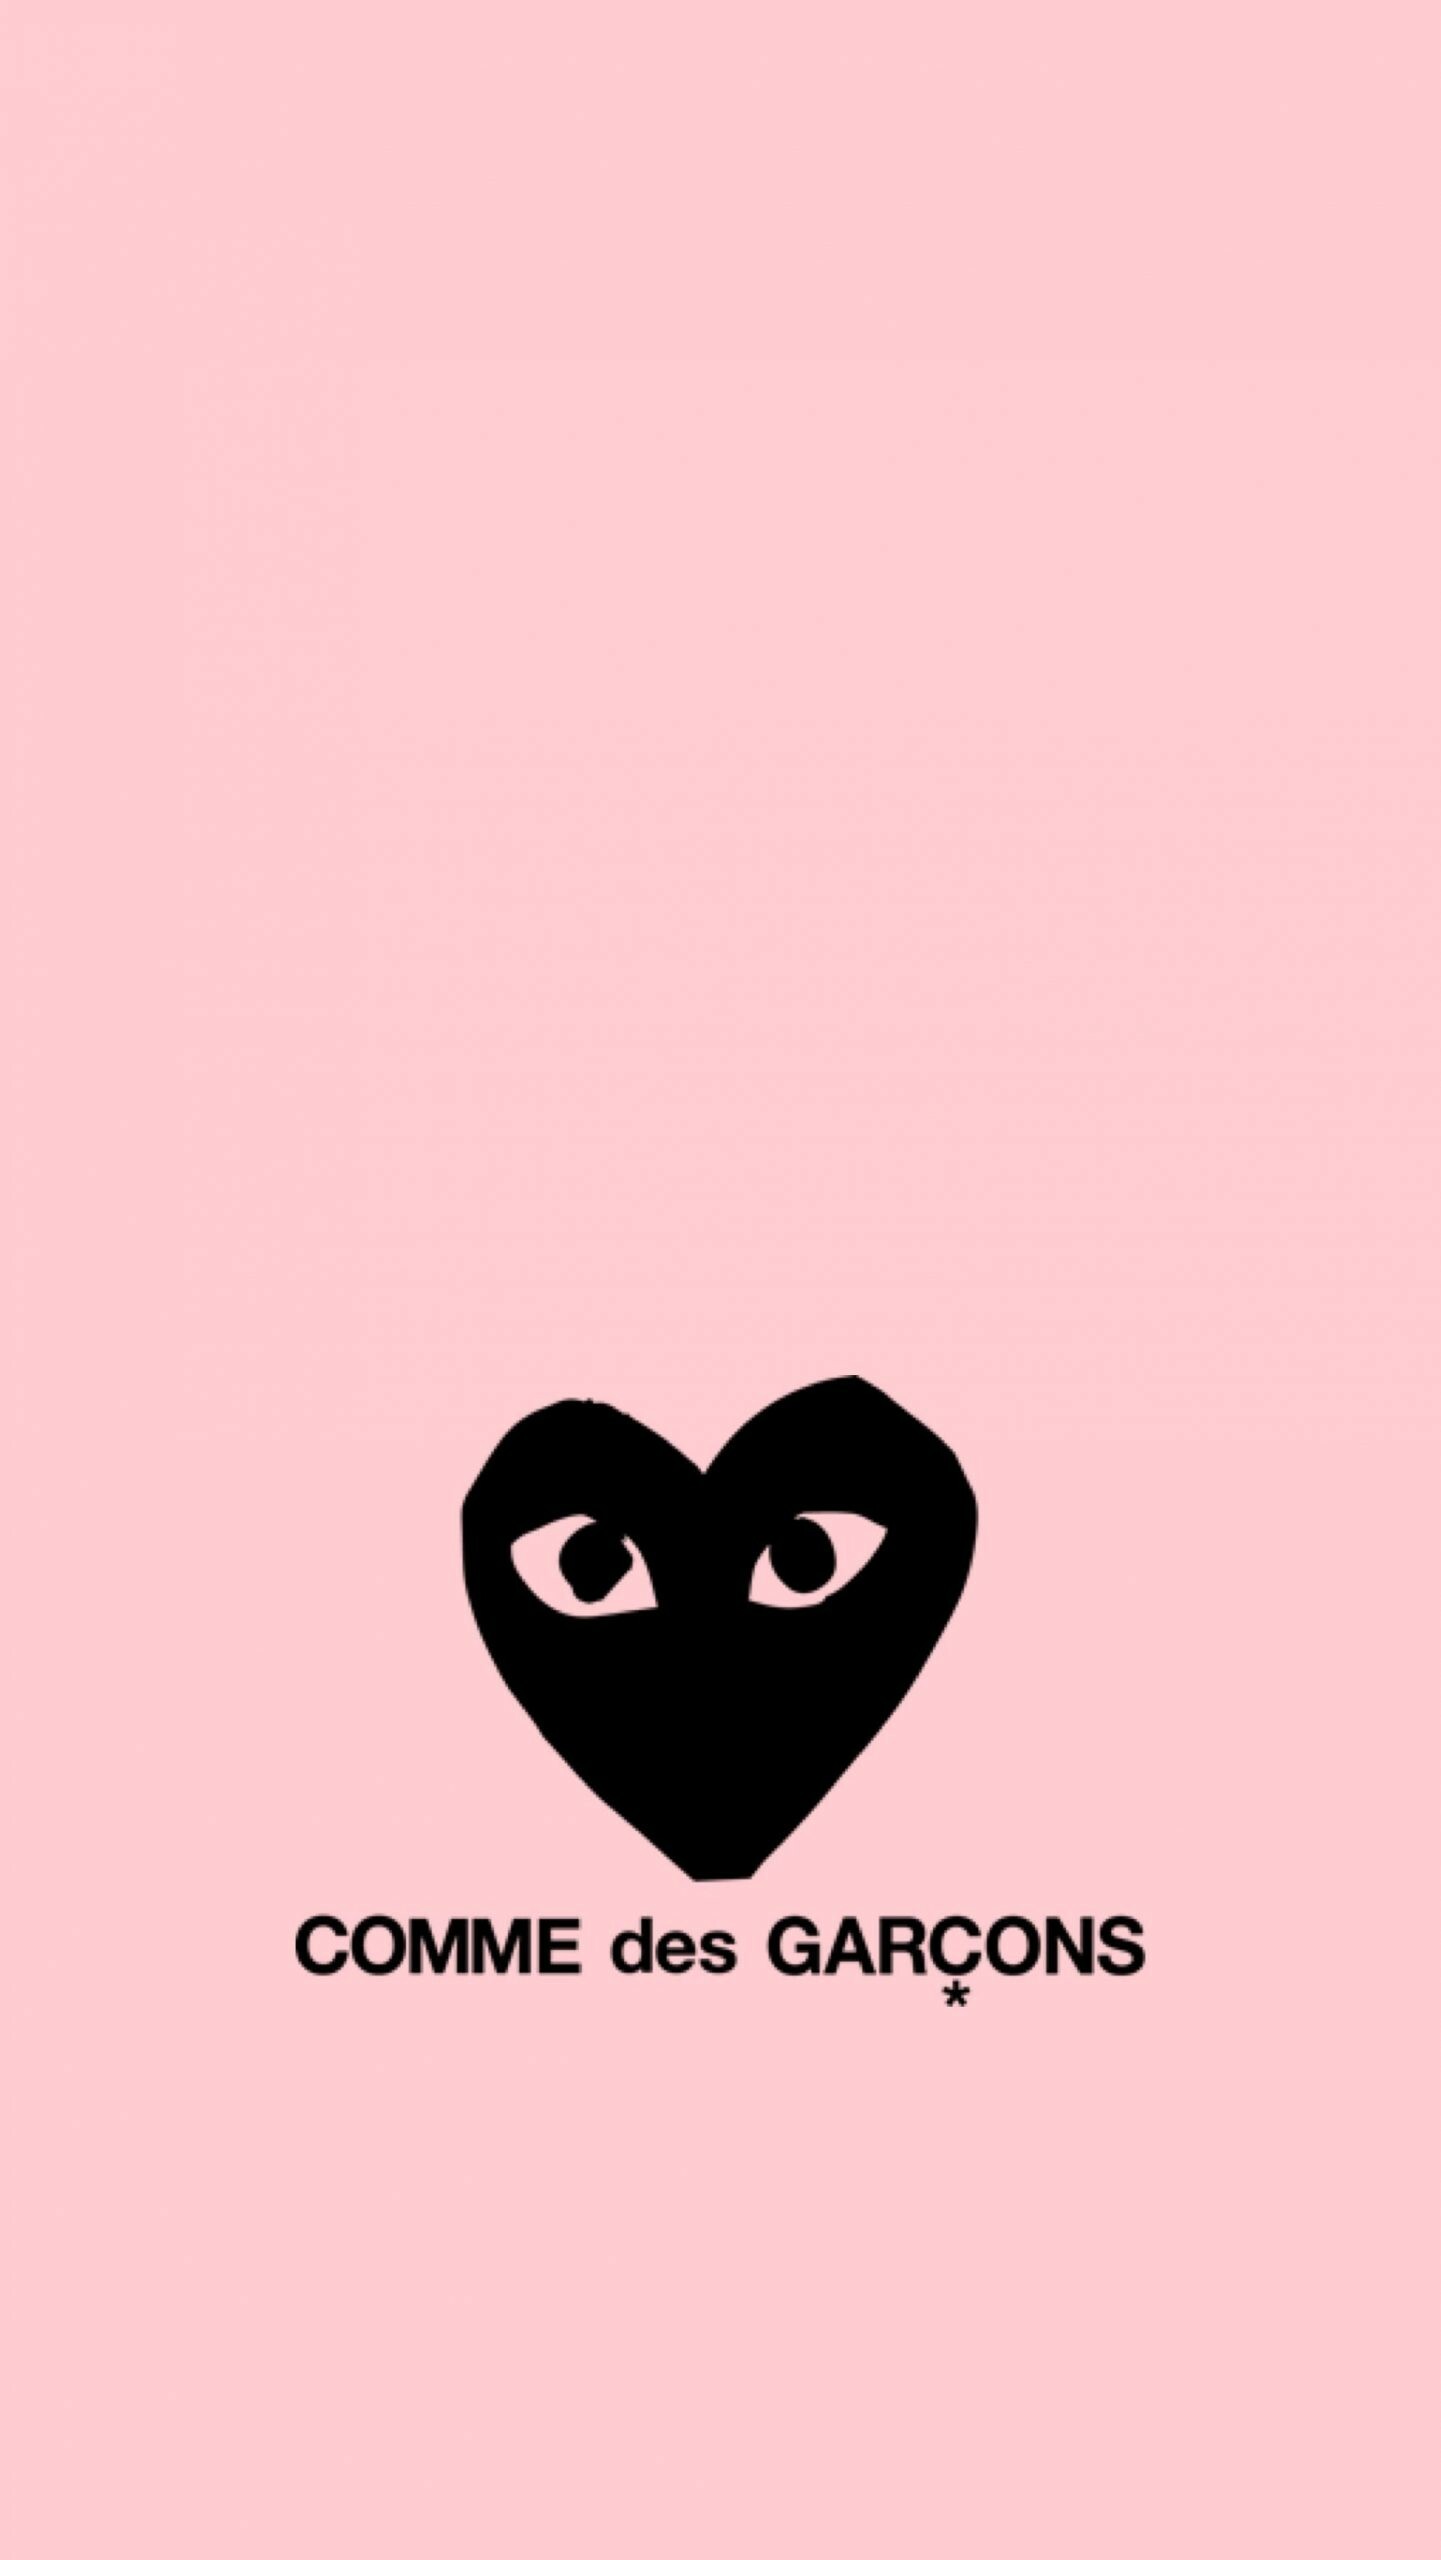 HD wallpaper, Phone Hd Comme Des Garcons Background Photo, Interesting Facts, Fashion Label, Fashion Industry, 1450X2560 Hd Phone, Comme Des Garcons